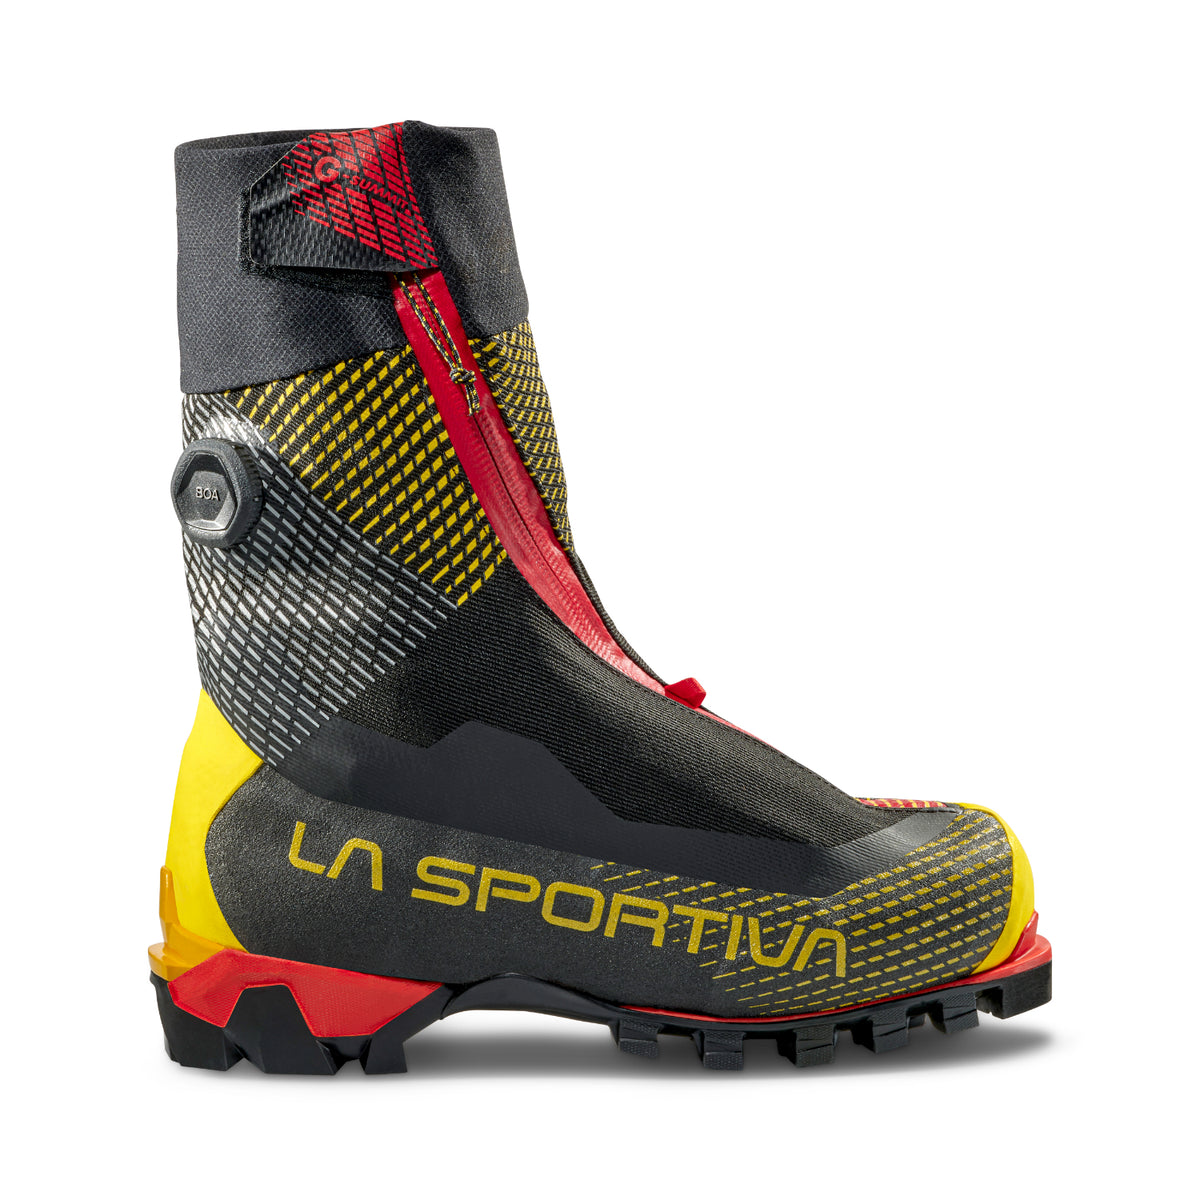 La Sportiva G-Summit mountaineering boots in black yellow and red.